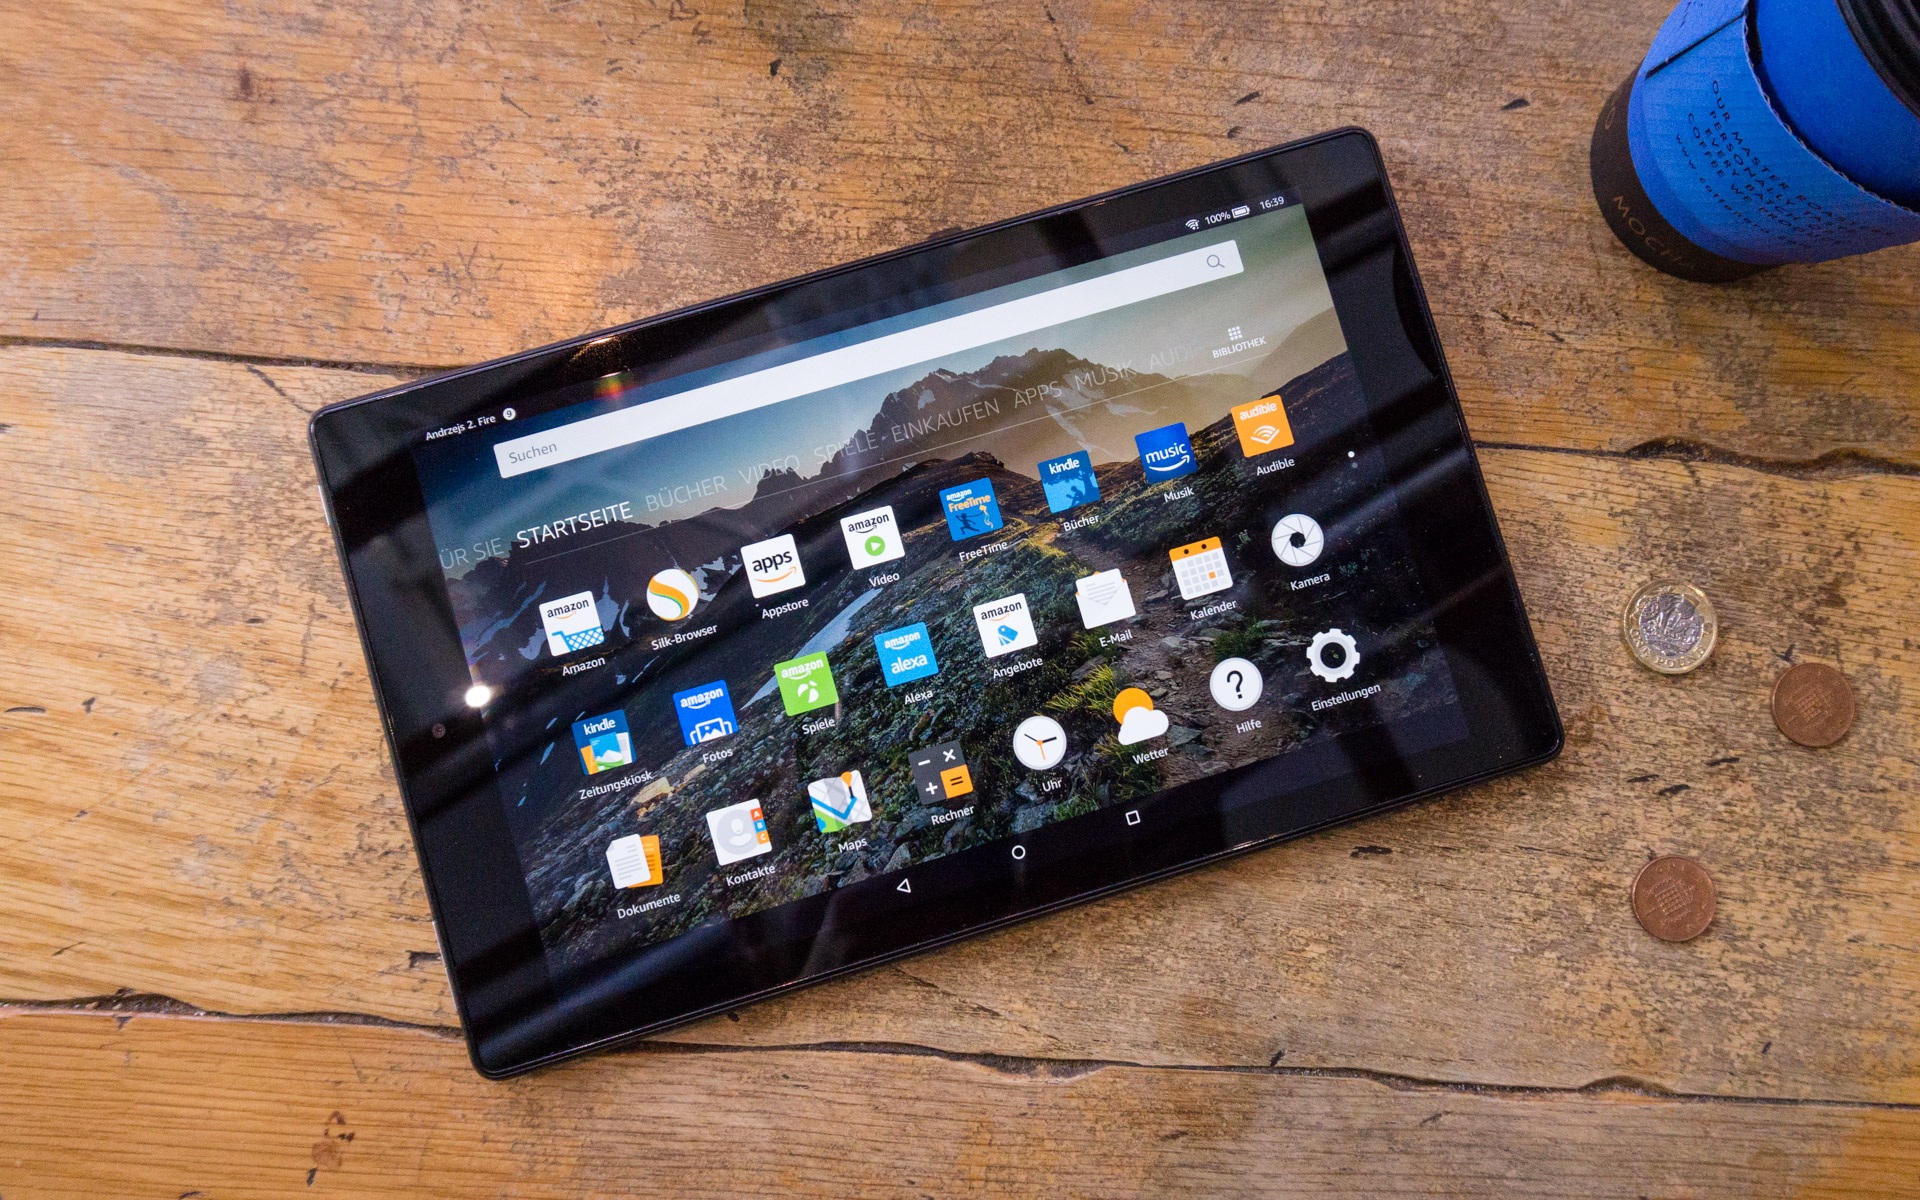 Amazon Fire HD 10: Entertainment and productivity on a limited budget in Israel